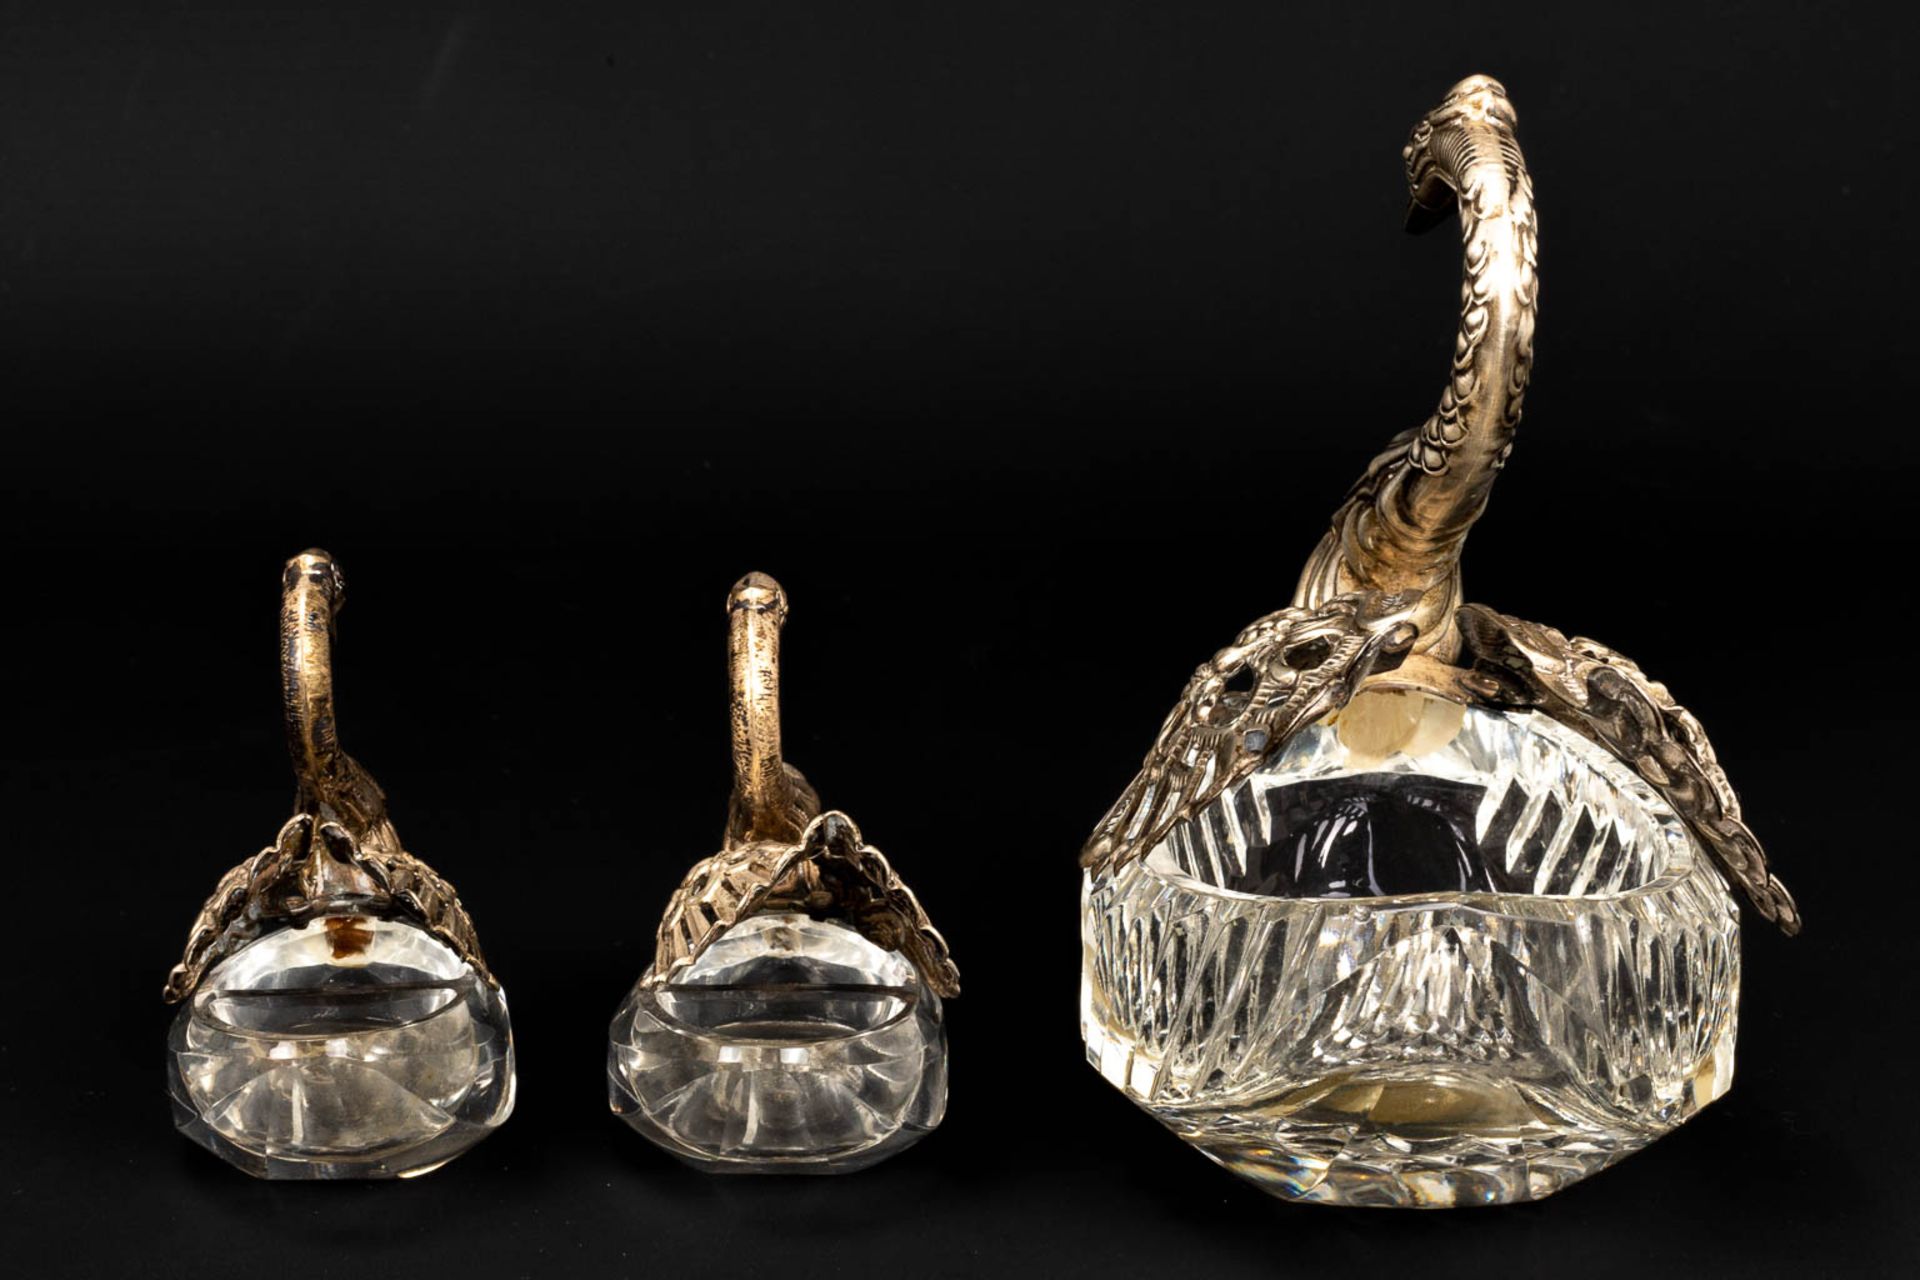 A collection of 3 sugar pots in the shape of a swan, made of crystal and solid silver. - Image 7 of 13